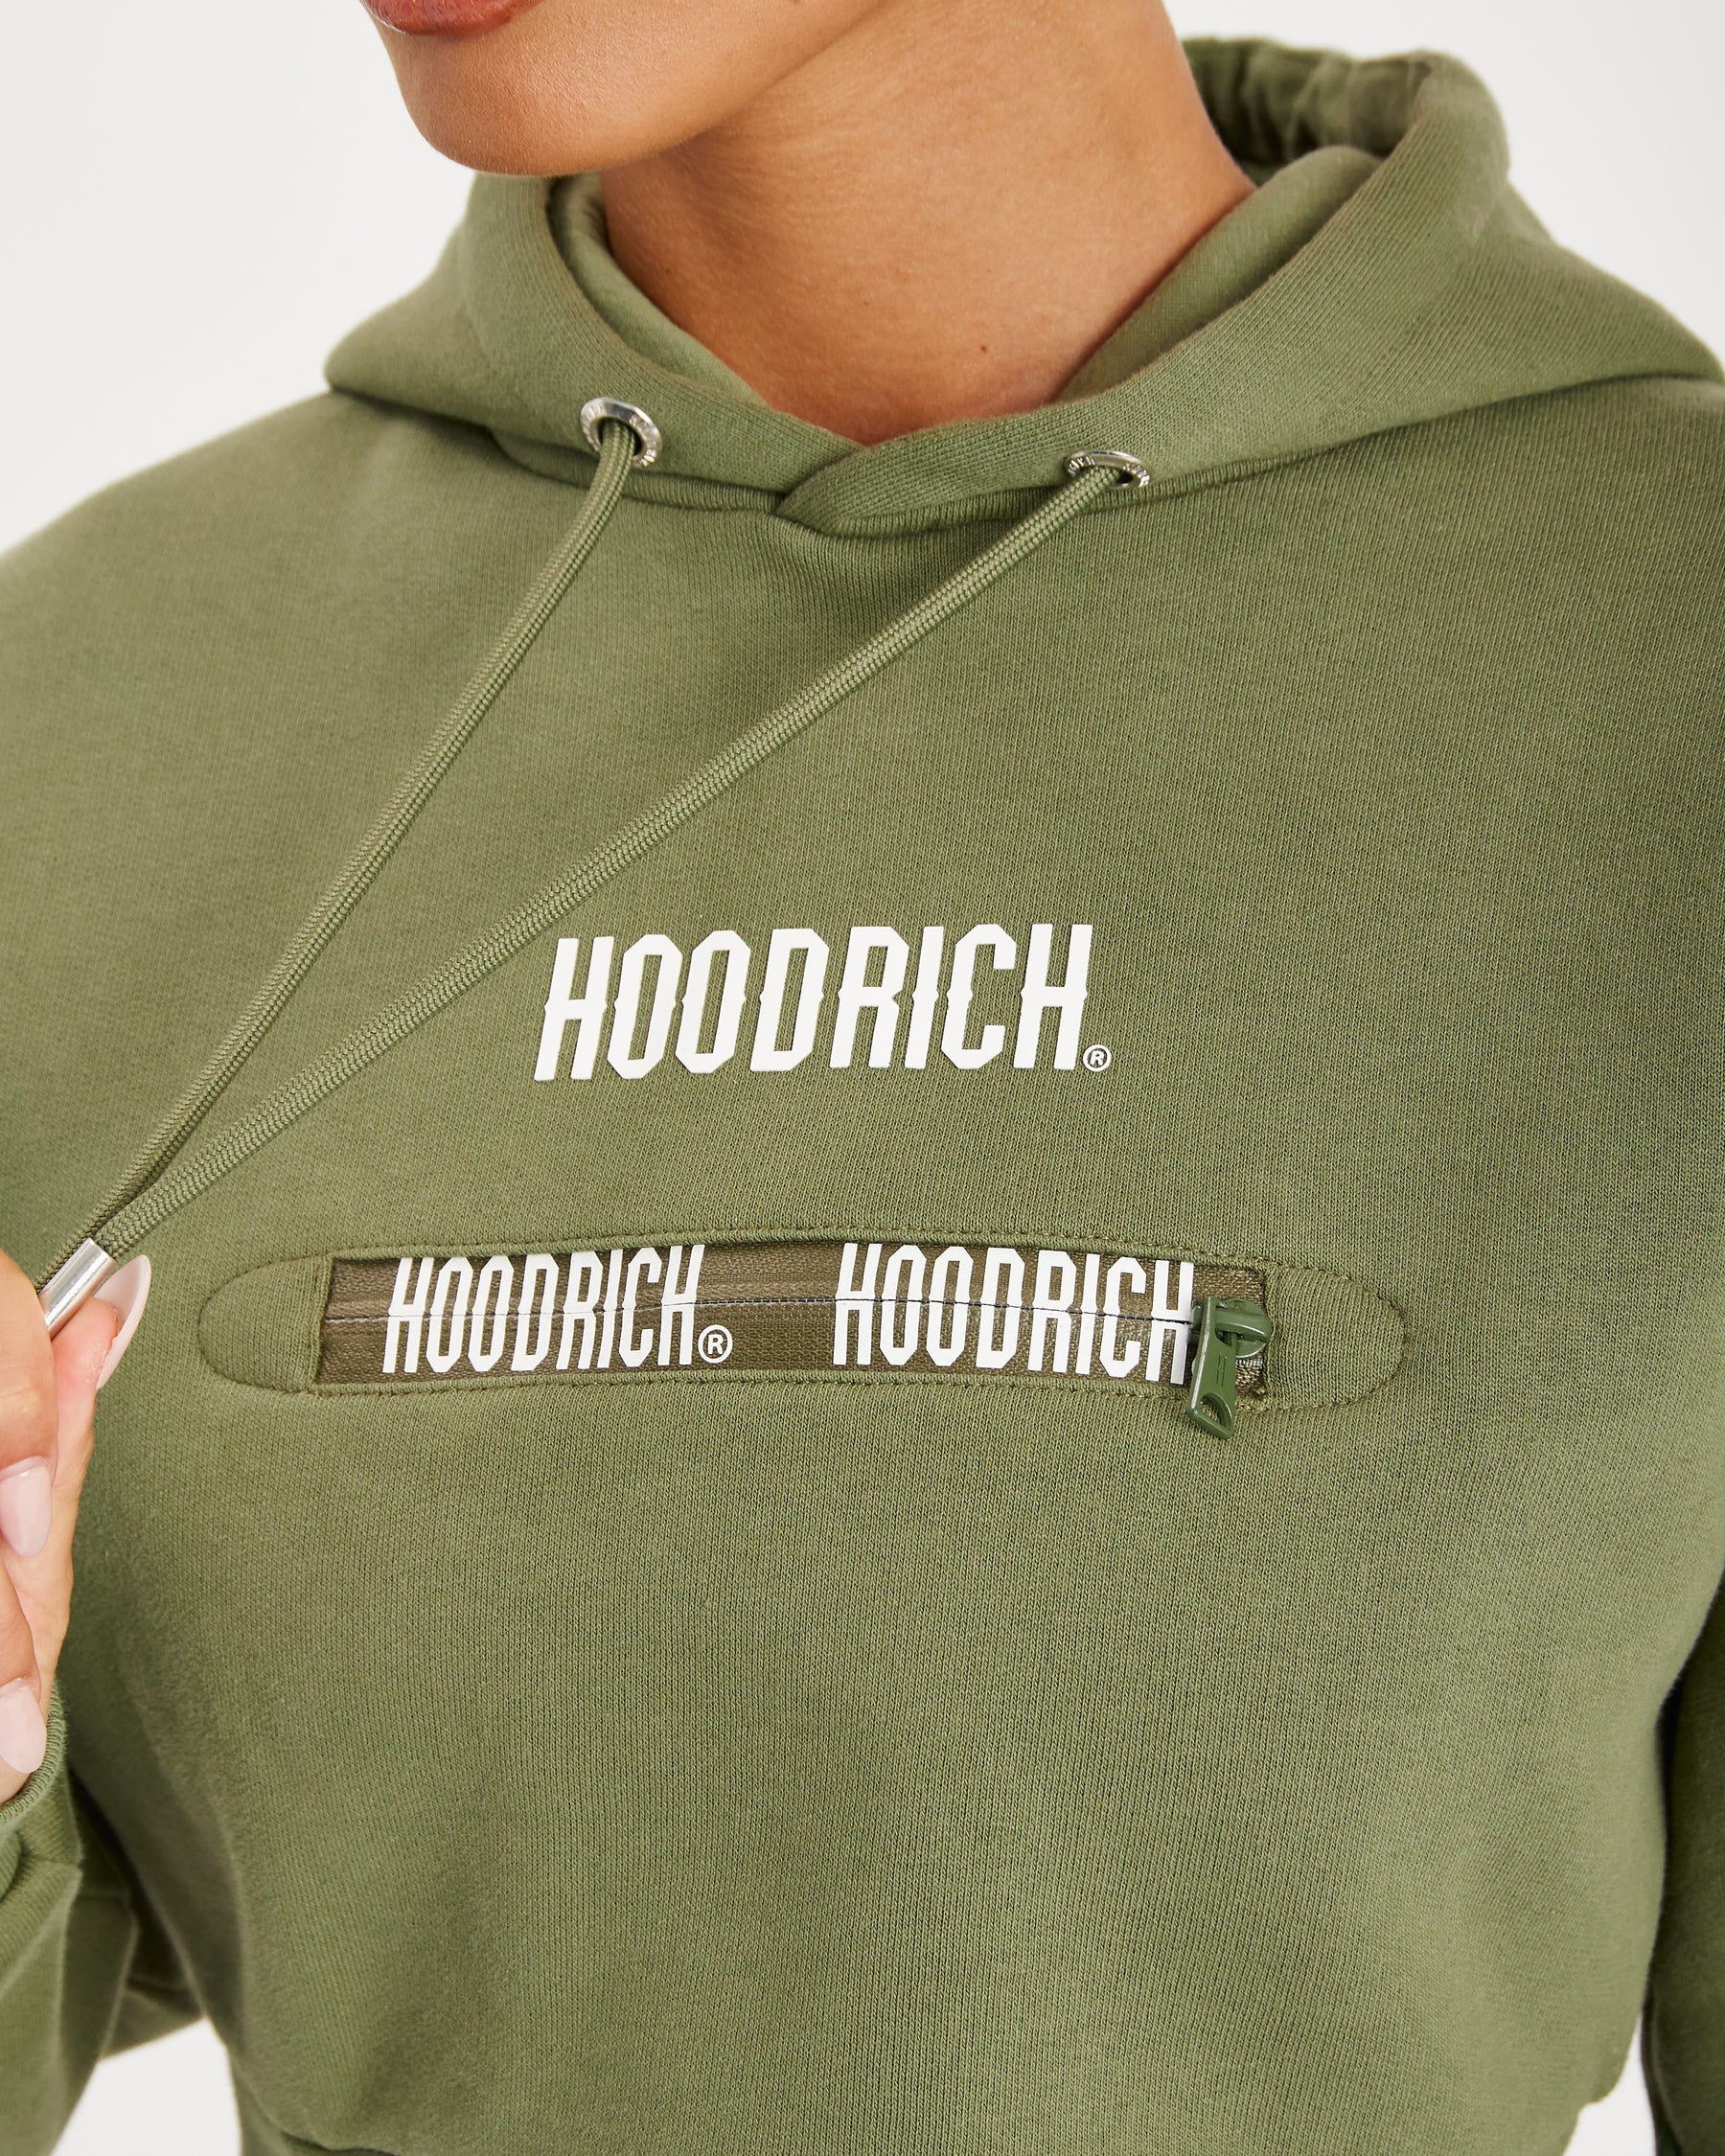 Aspect Cropped Hoodie - Olive/White